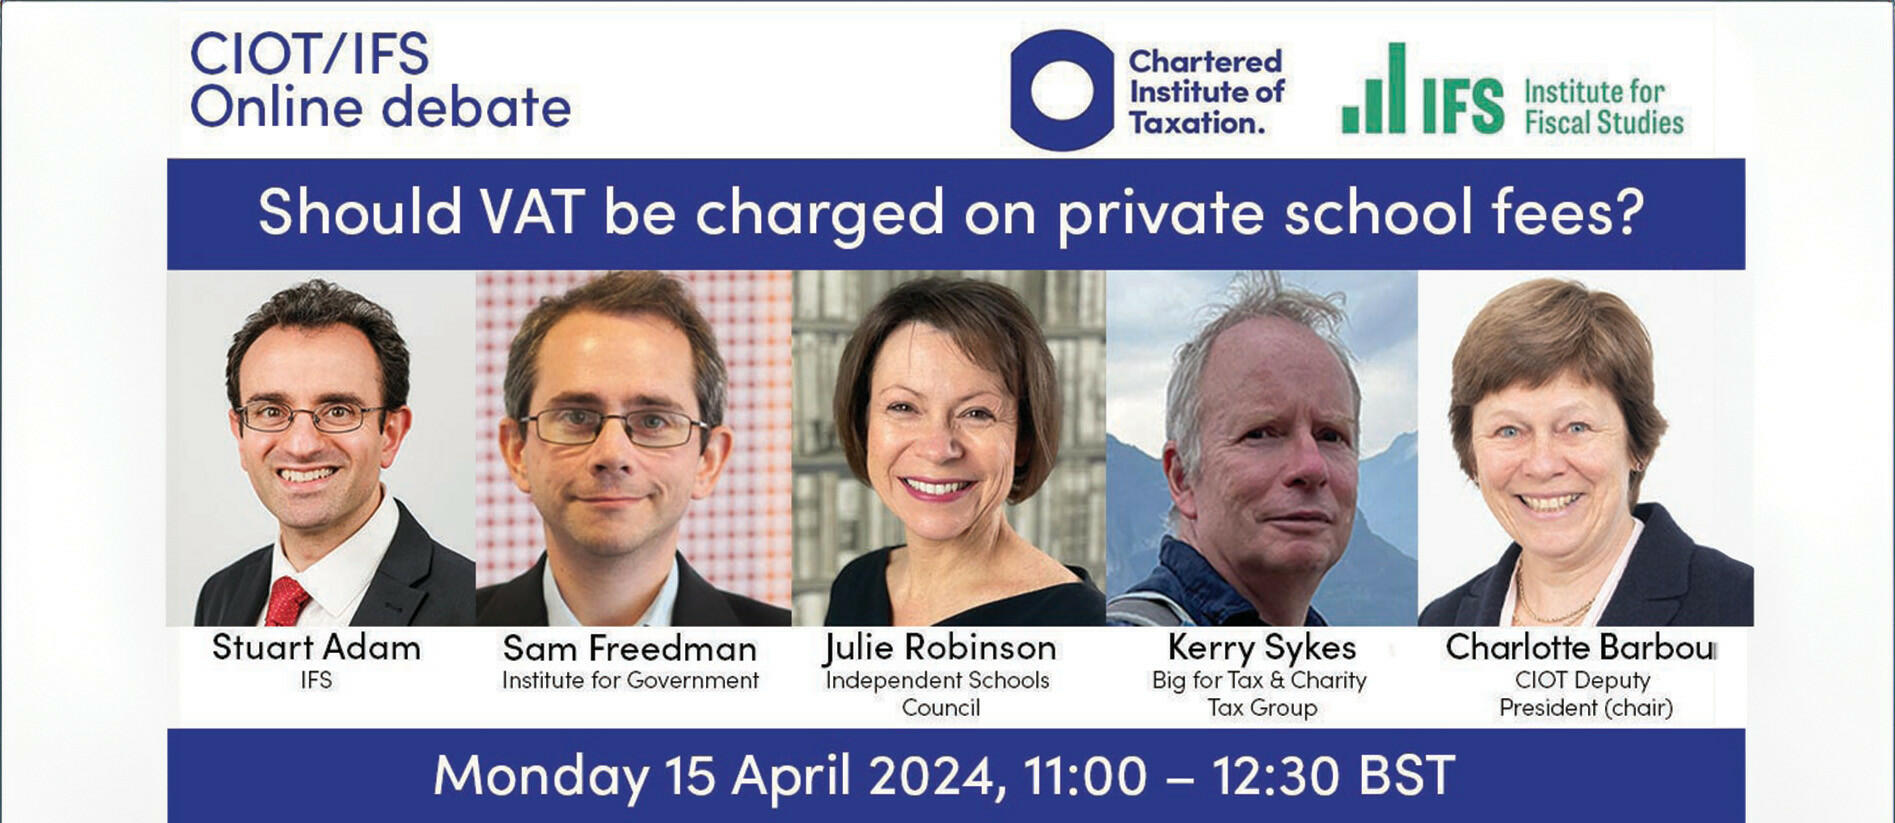 Online debate: Should VAT be charged on private school fees?